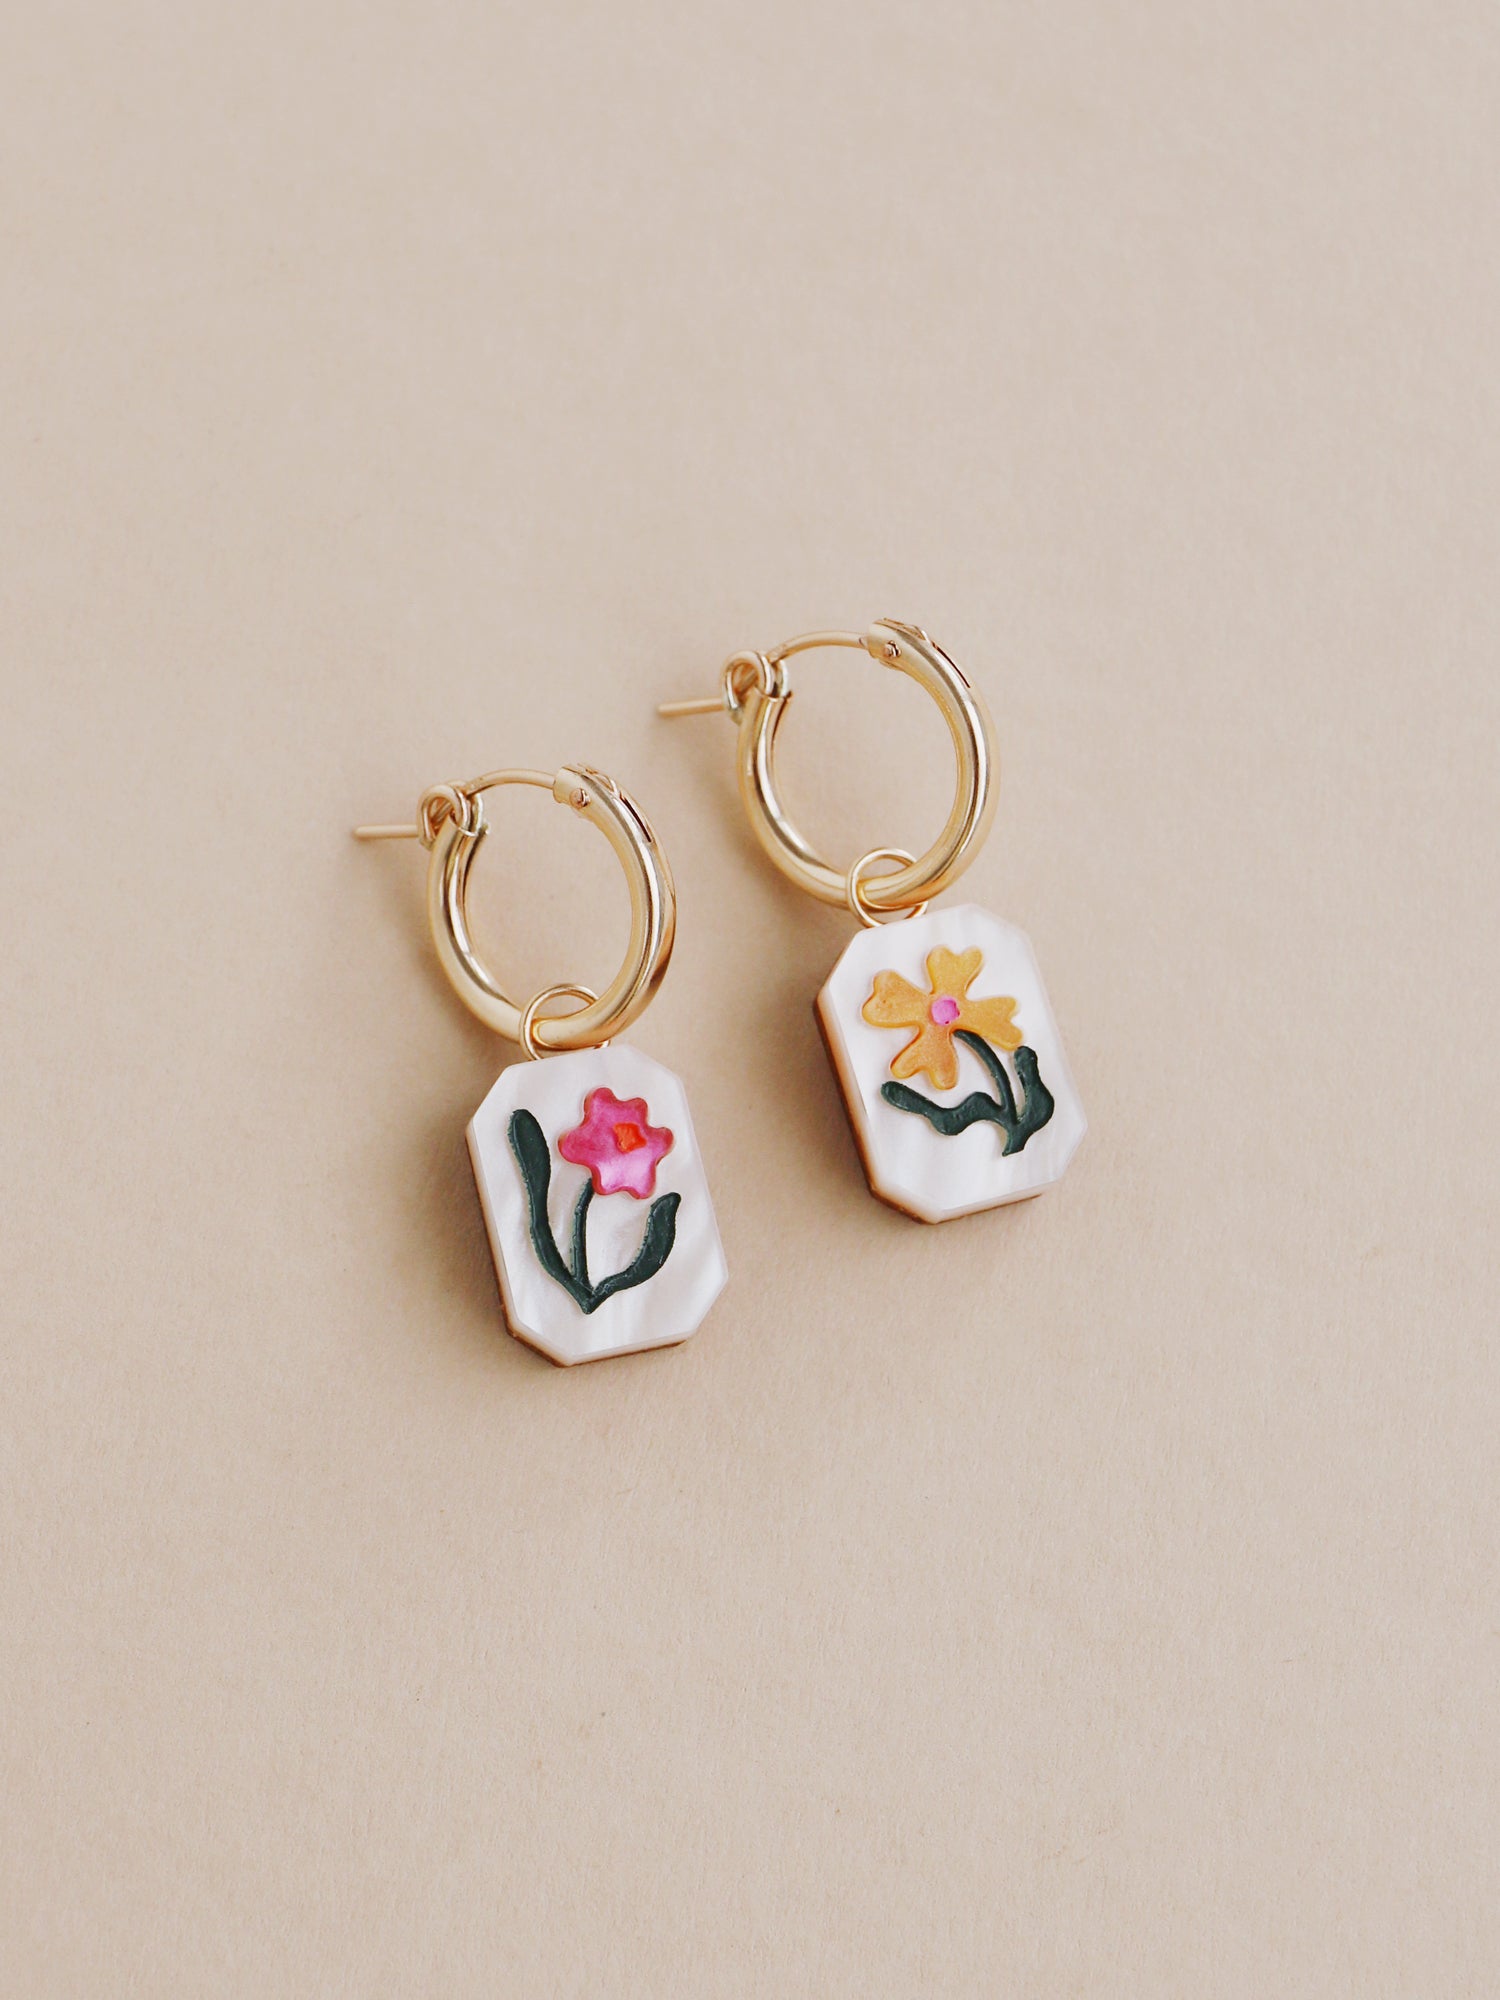 Flower charm hoop earrings. Made from acrylic and 14k gold-filled hoops & findings.  Handmade in the UK by Wolf & Moon.